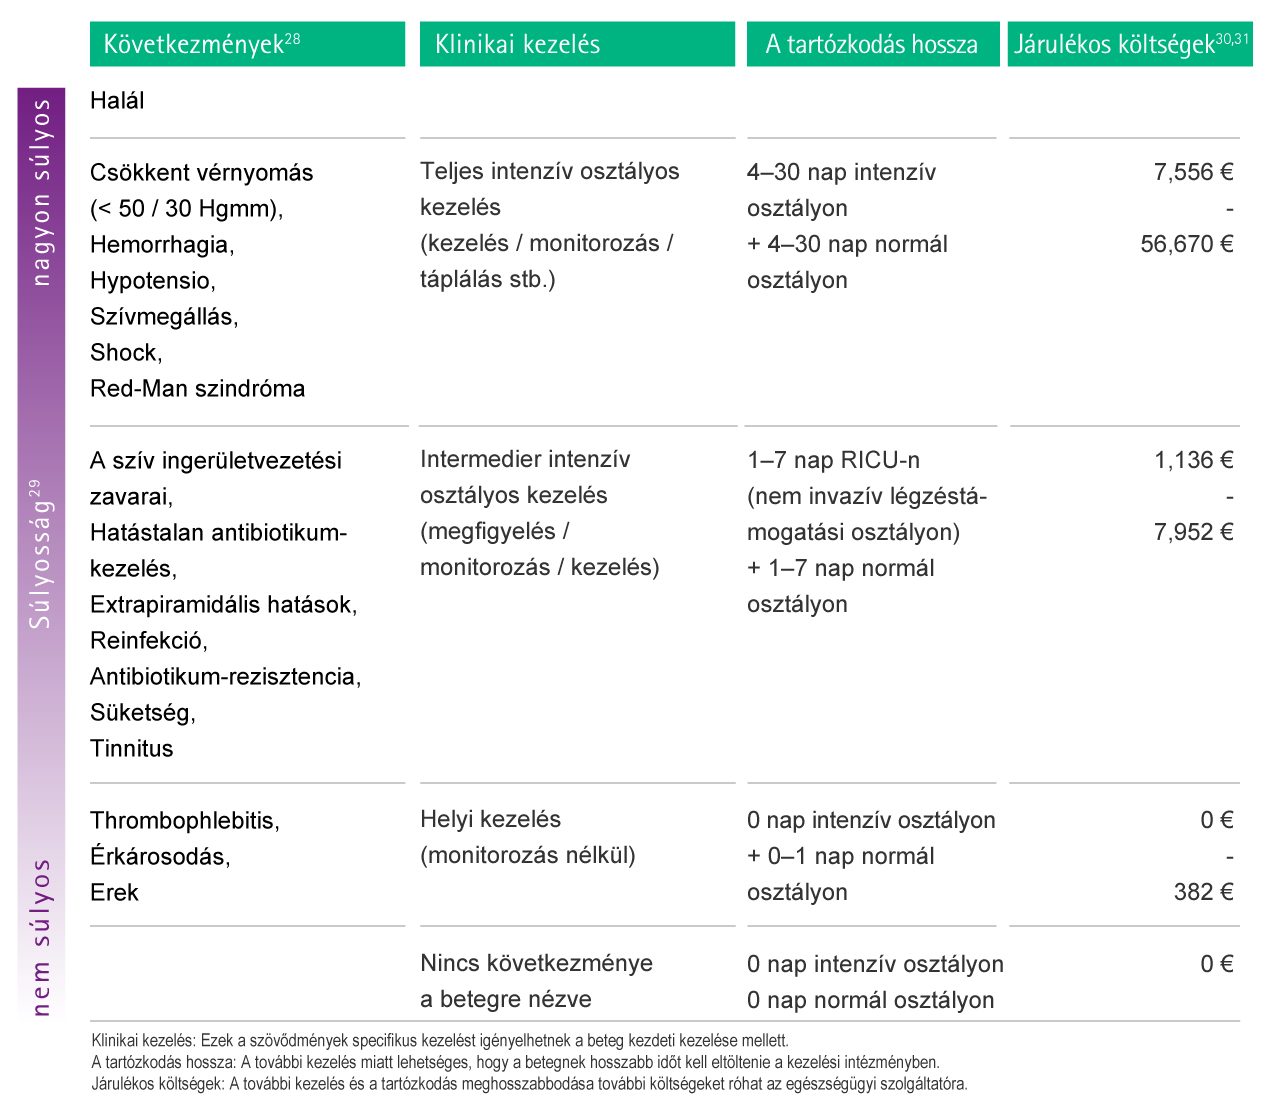 Table with estimations of possible additional costs as a consequence of complications caused by medication error.